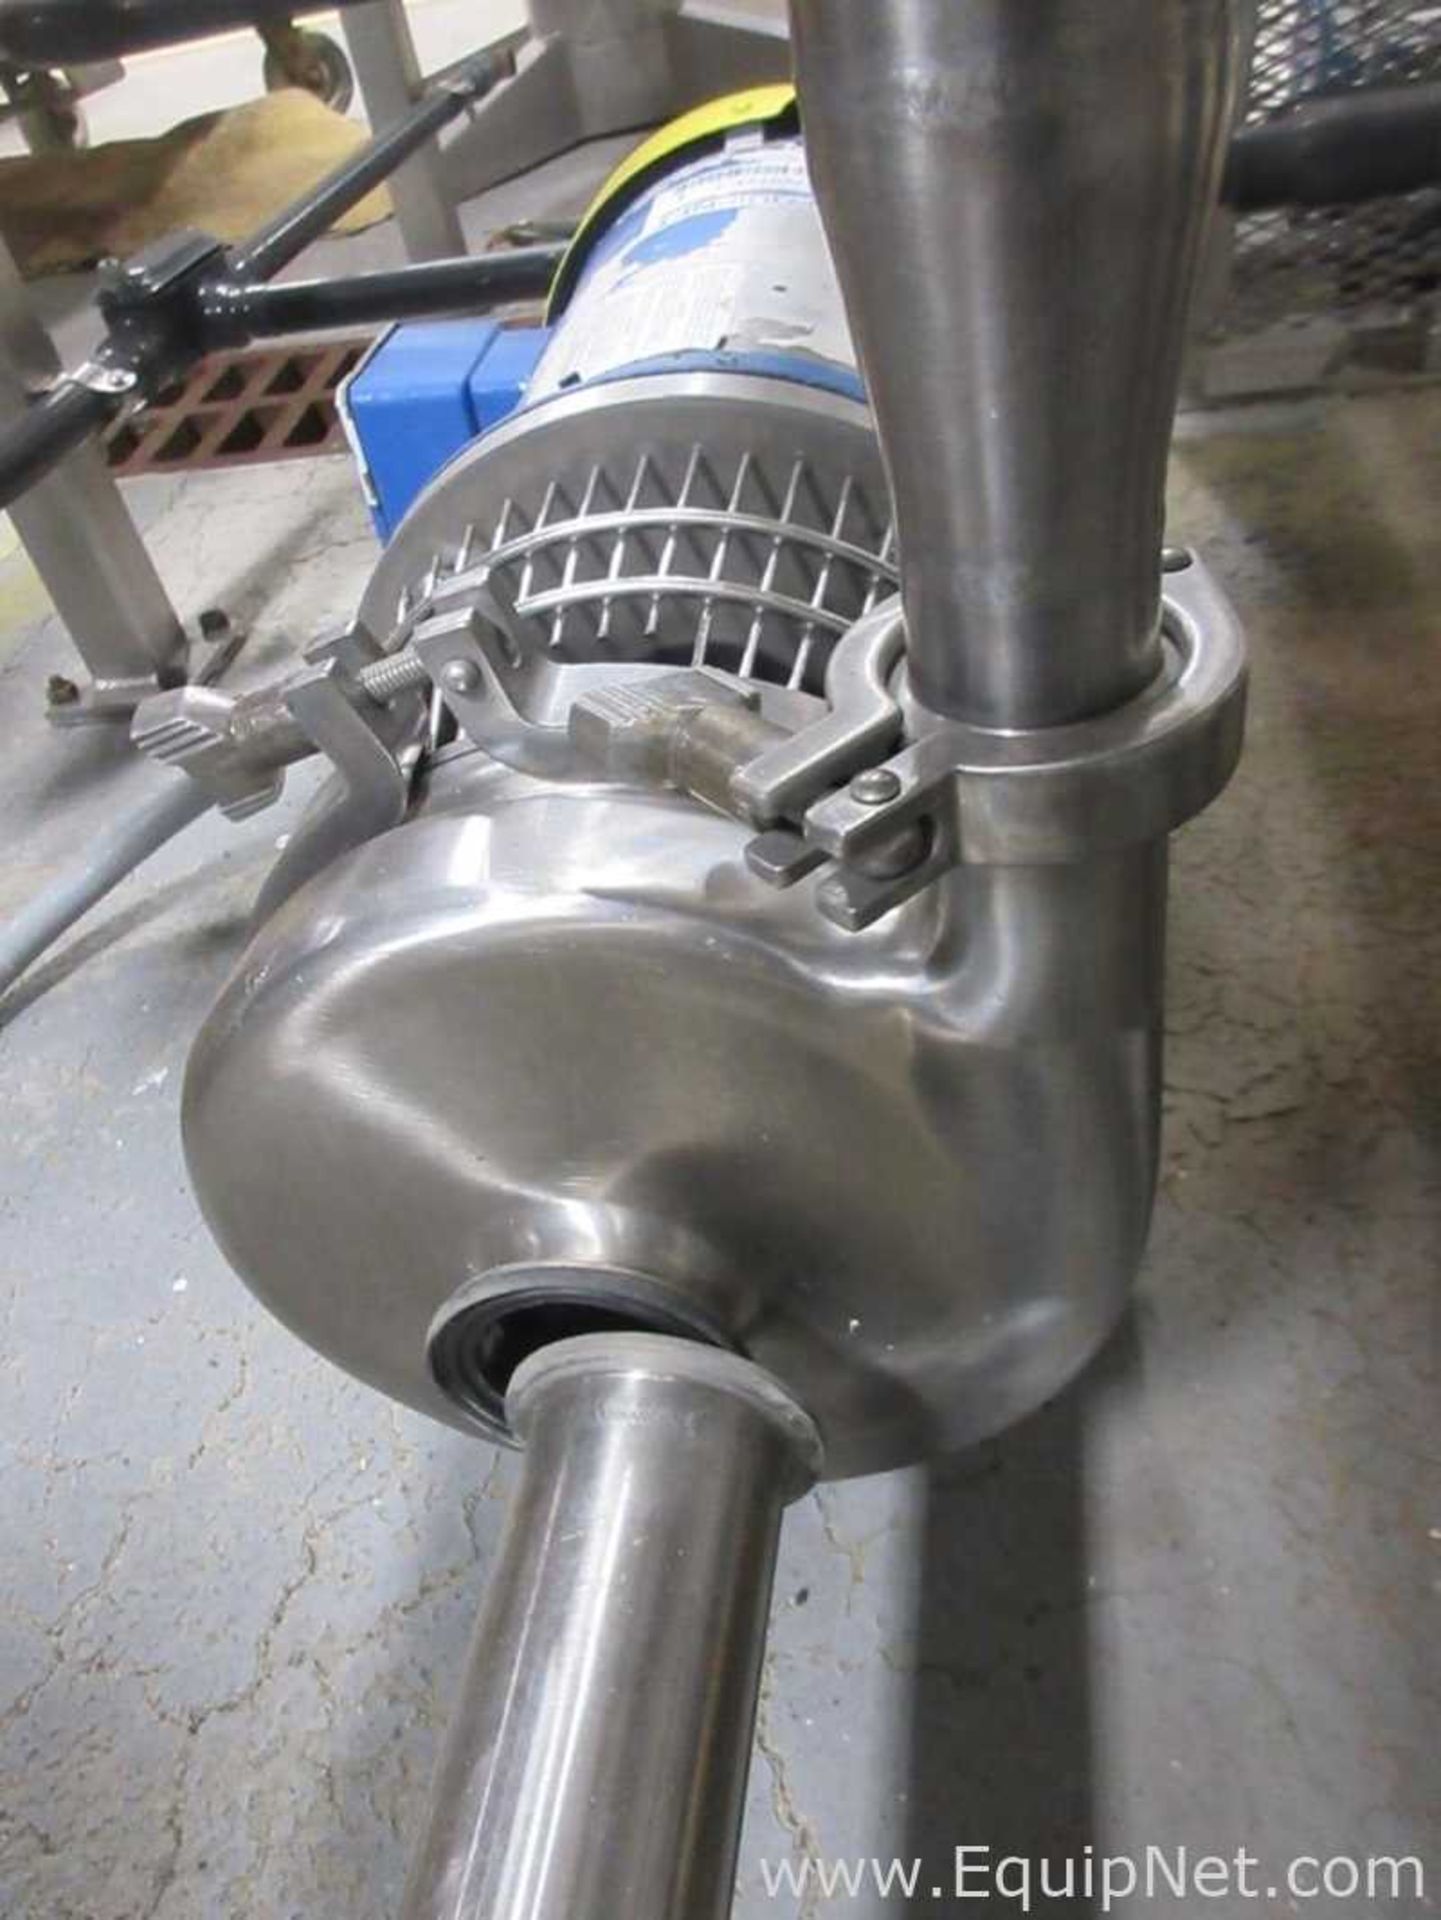 Sanitary Stainless Steel 3 HP Centrifugal Pump - Image 4 of 5